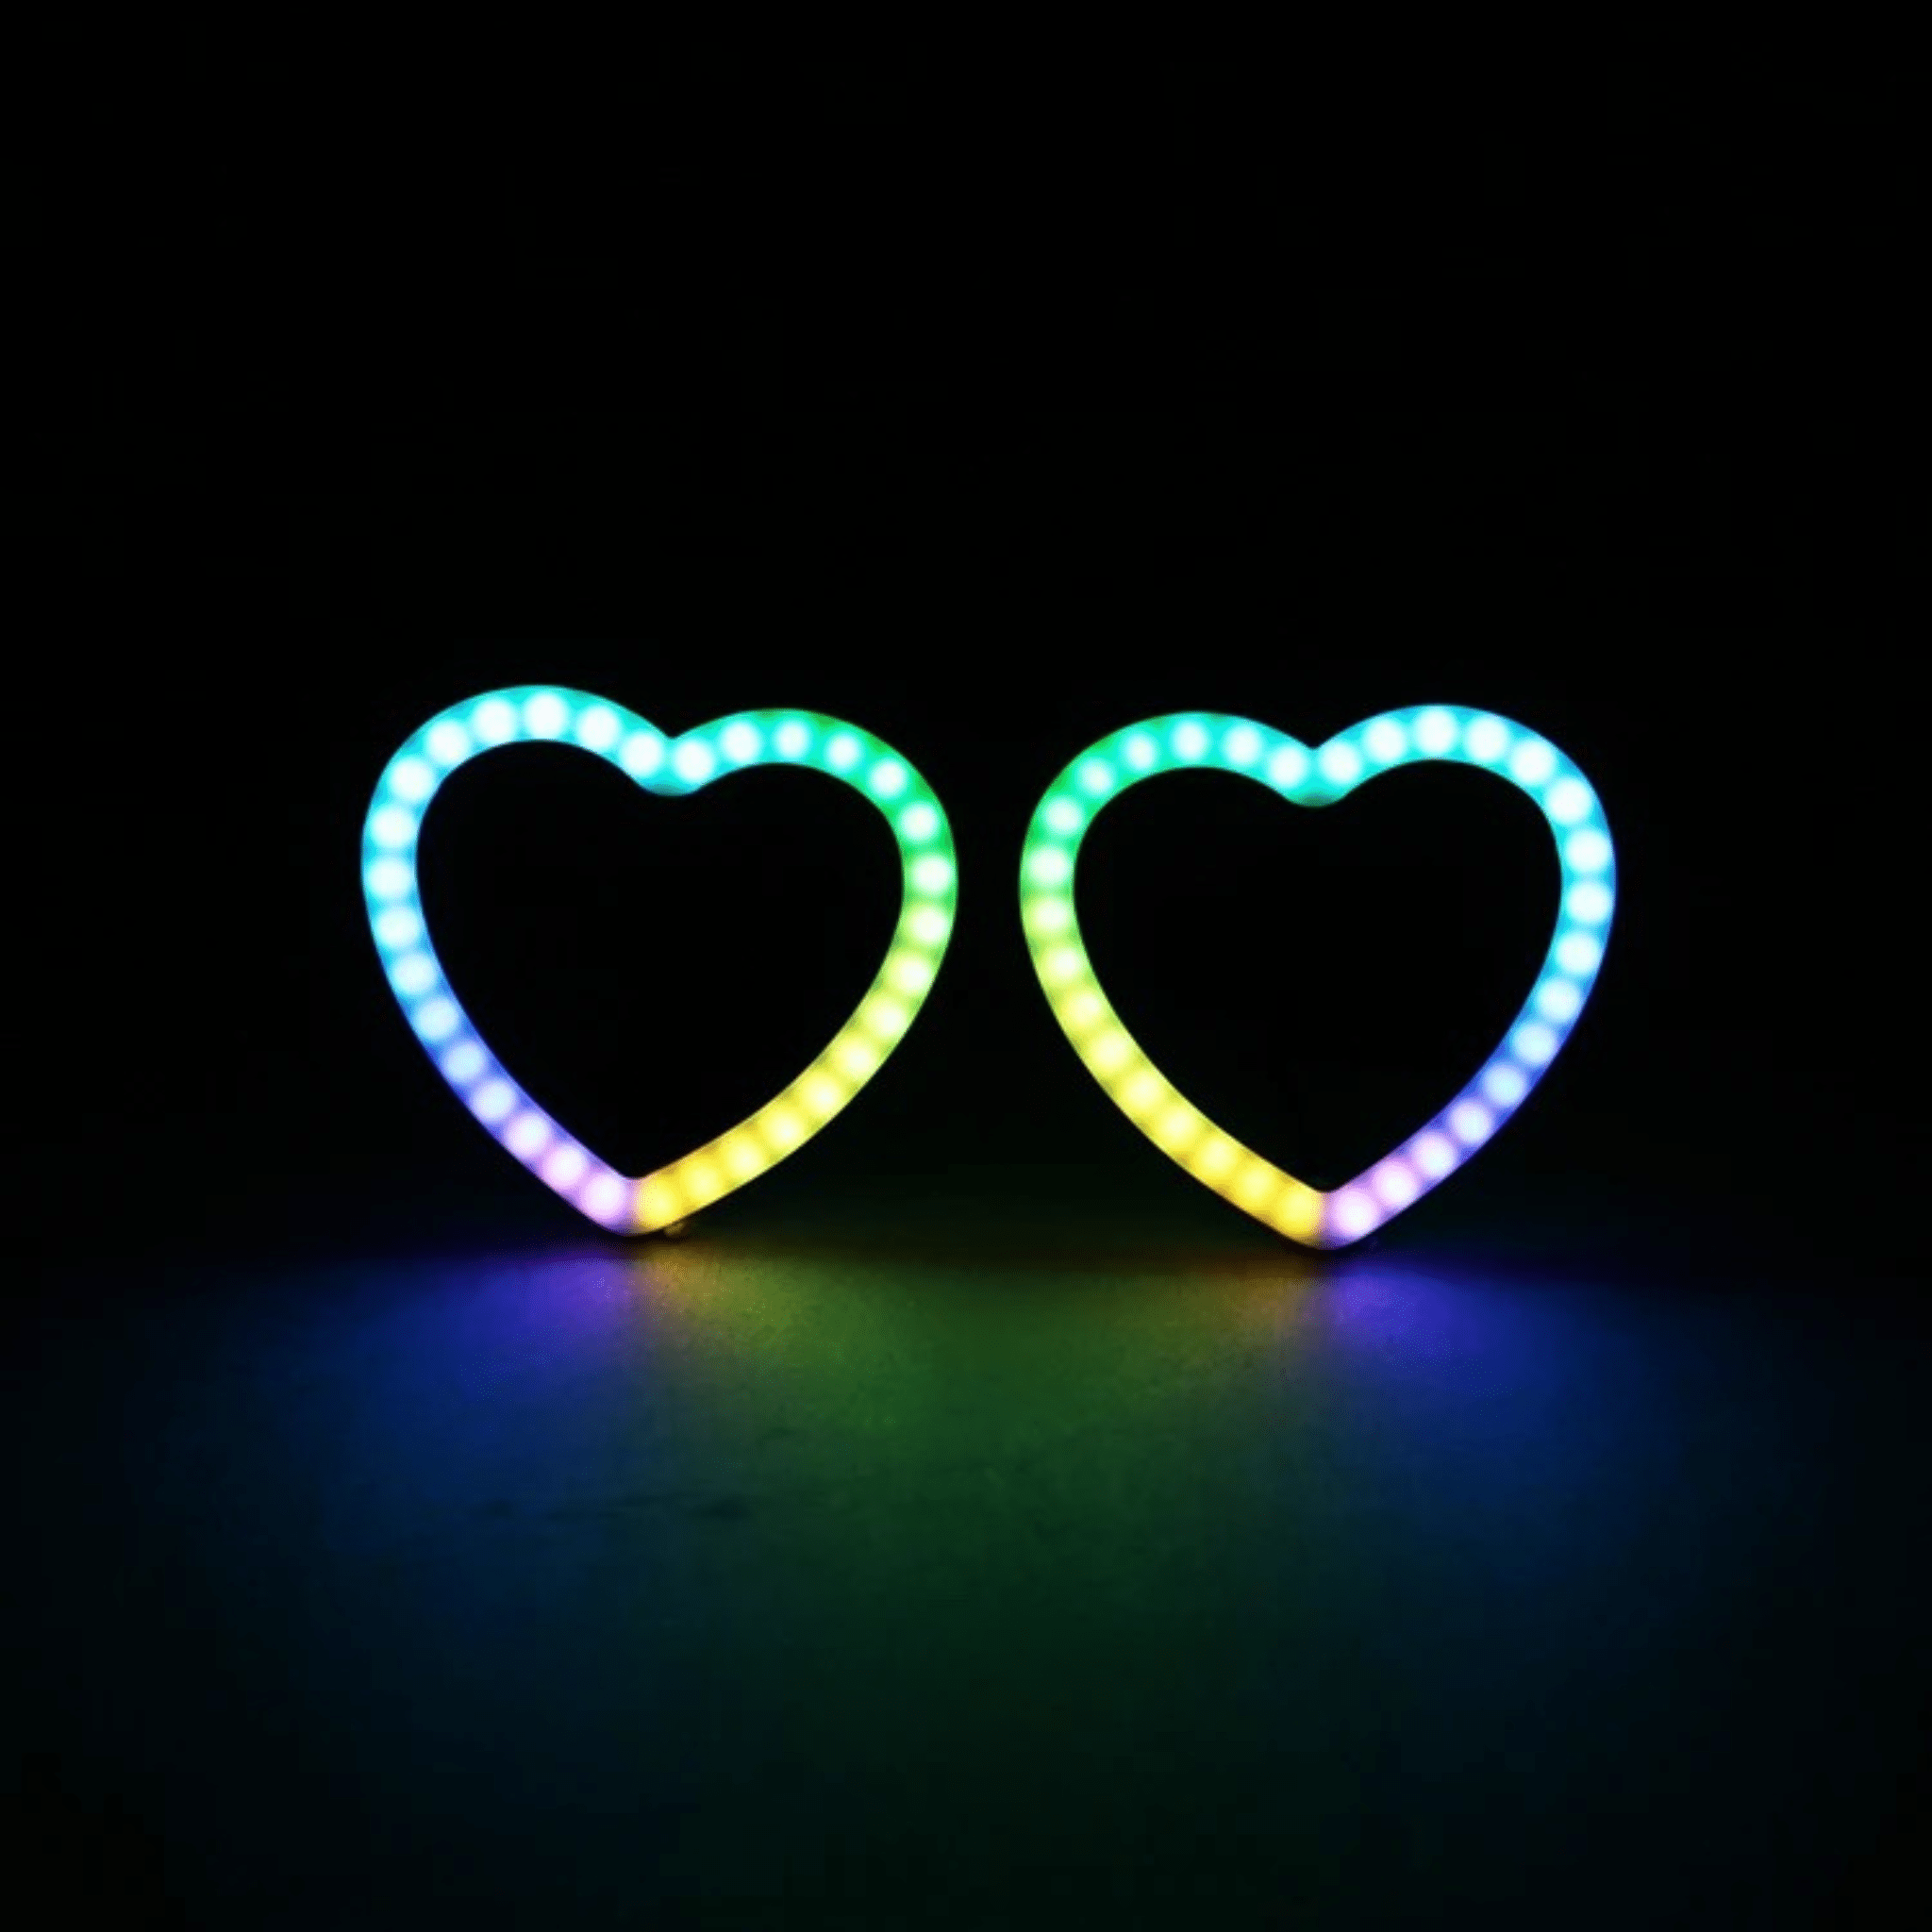 Heart Halo Rings | Multicolor - RGB Halo Kits Multicolor Flow Series Color Chasing RGBWA LED headlight kit Oracle Lighting Trendz OneUpLighting Morimoto theretrofitsource AutoLEDTech Diode Dynamics